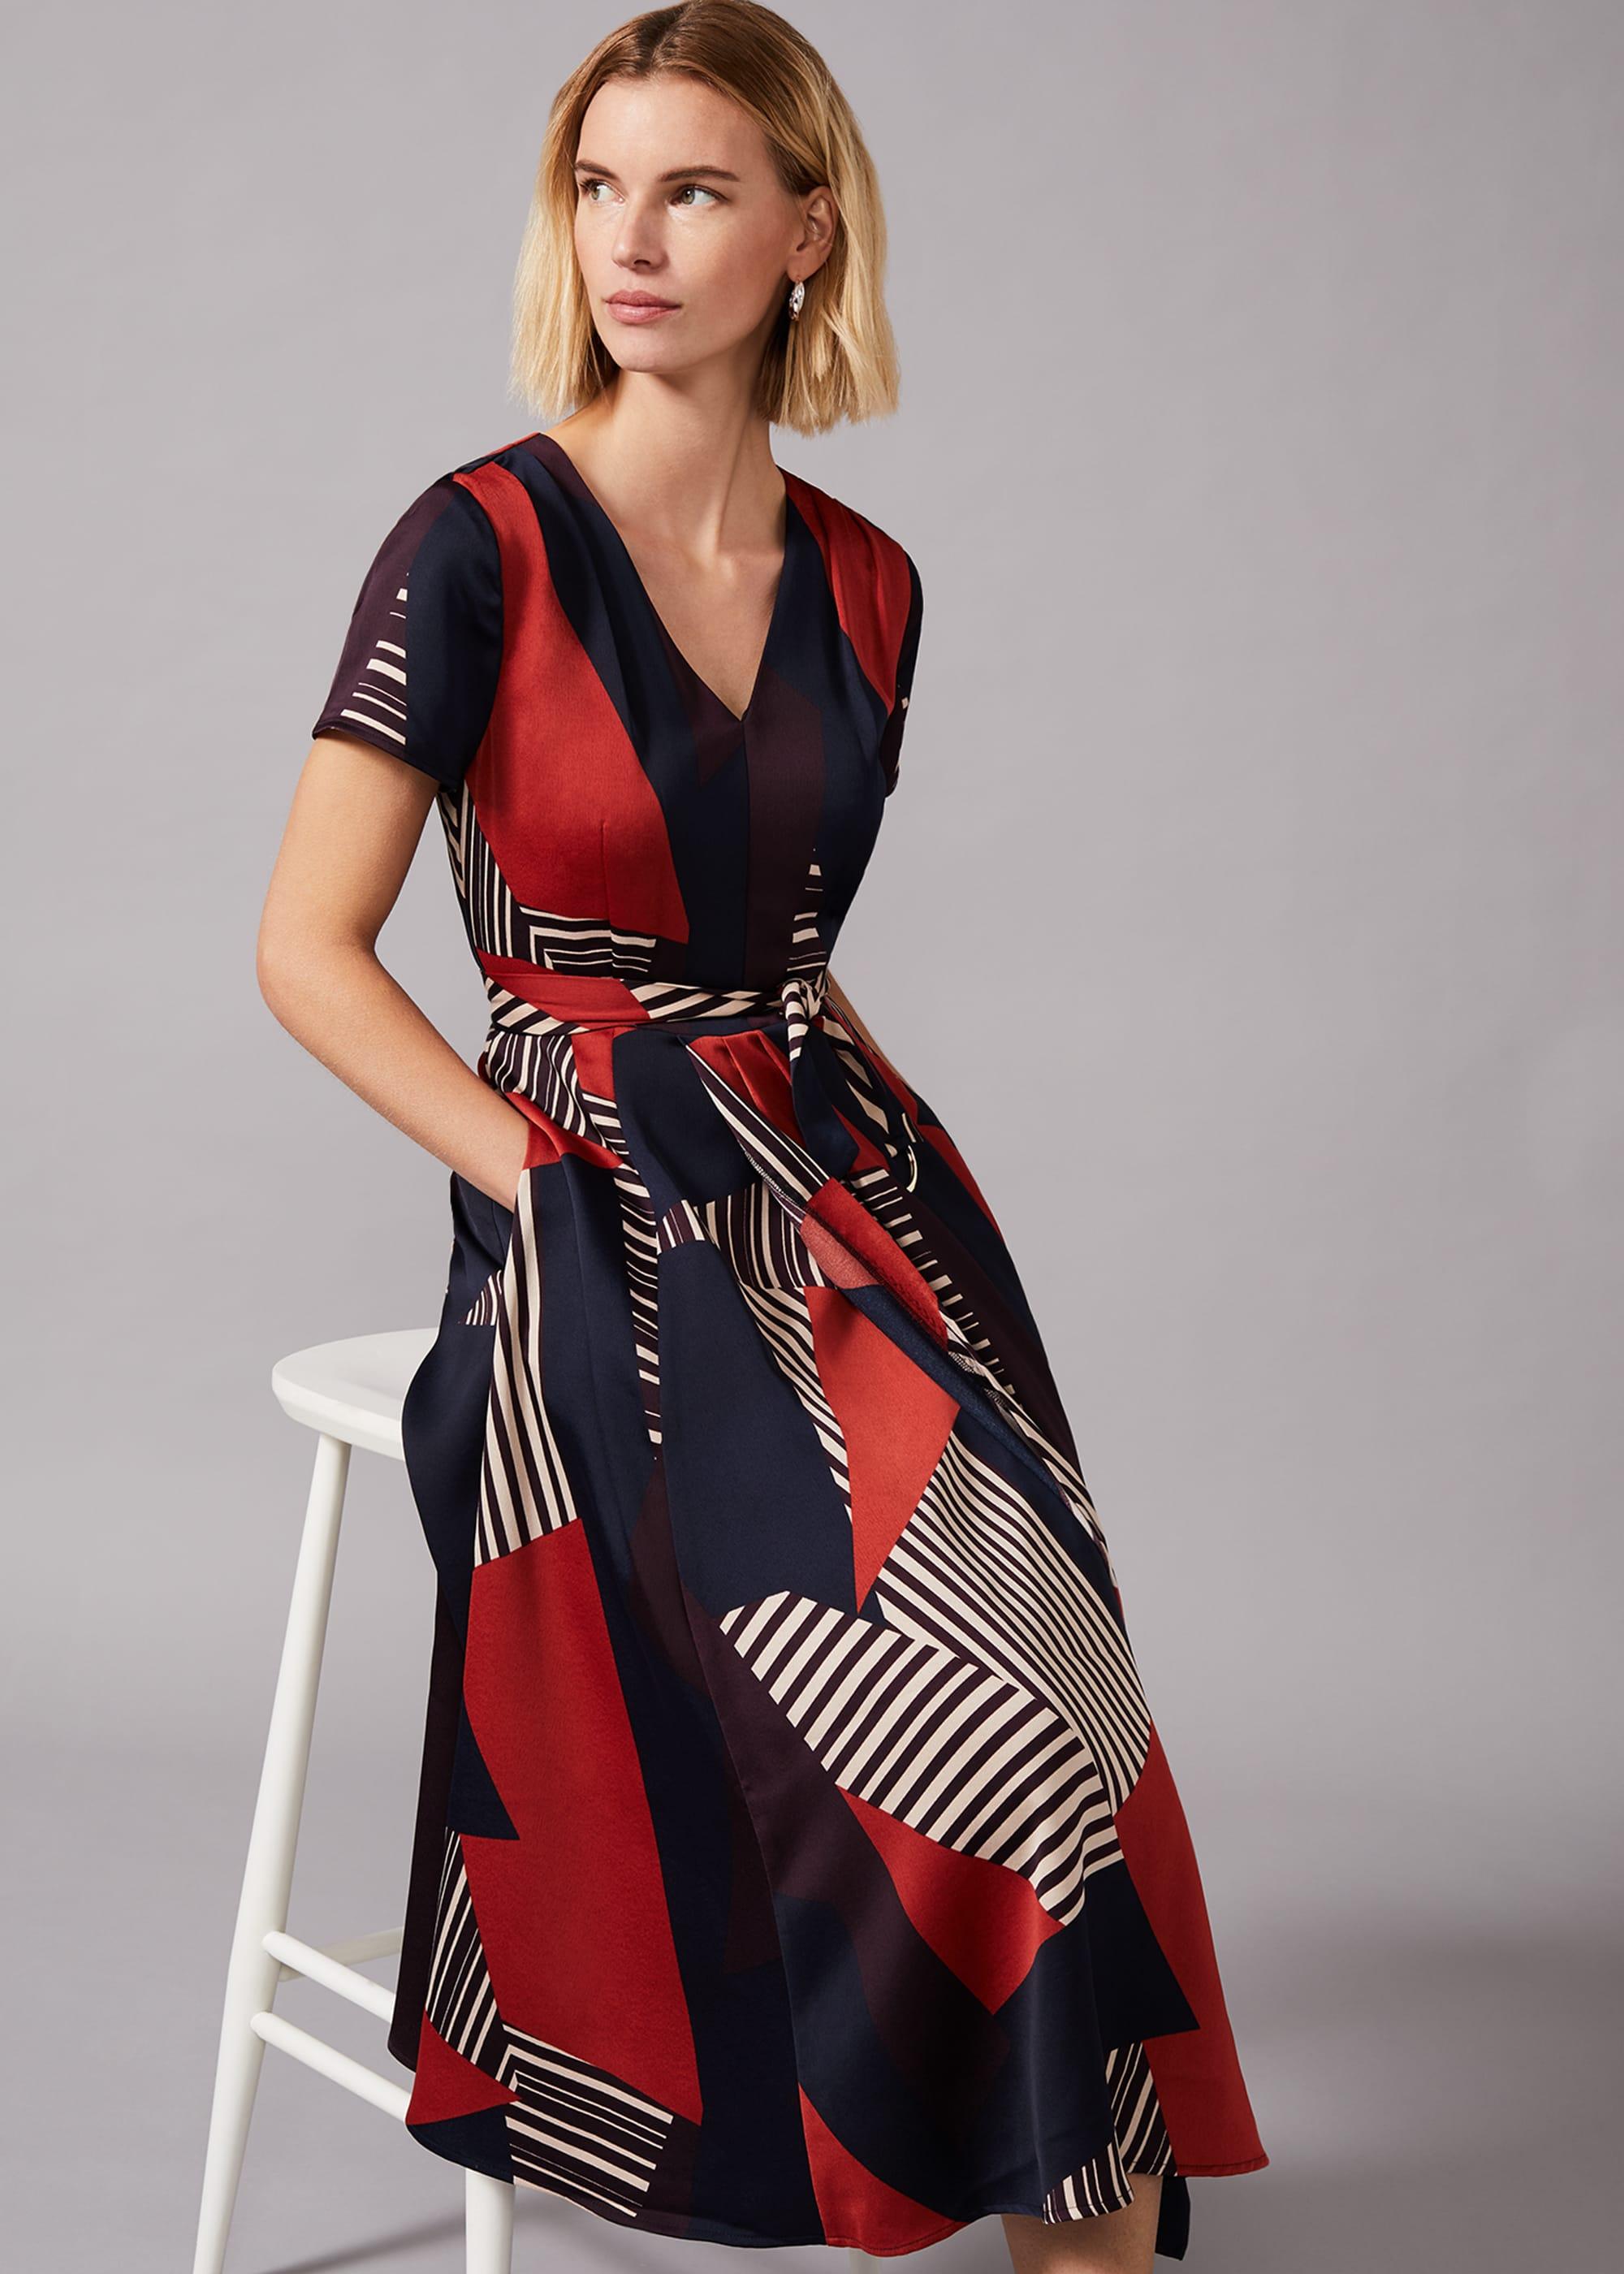 Phase Eight 's Clarice Graphic Print Dress in Red - Lyst